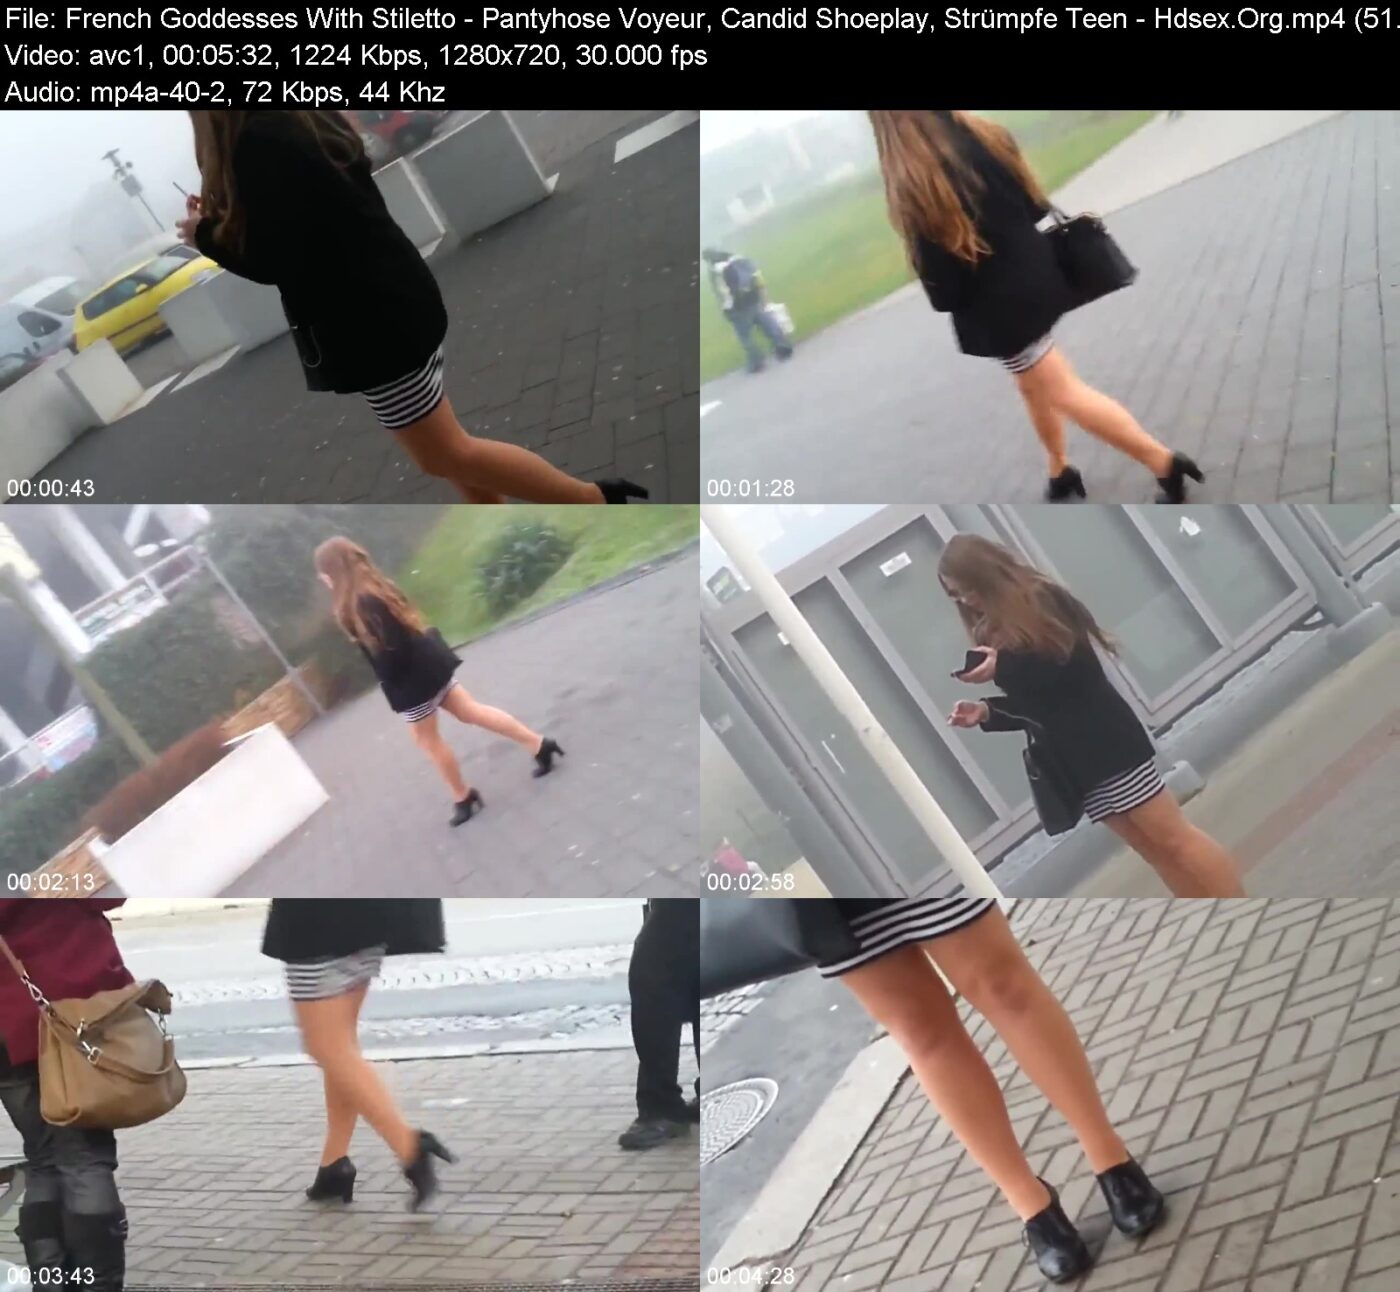 Actress: French Goddesses With Stiletto. Title and Studio: Pantyhose Voyeur, Candid Shoeplay, Strümpfe Teen – Hdsex.Org